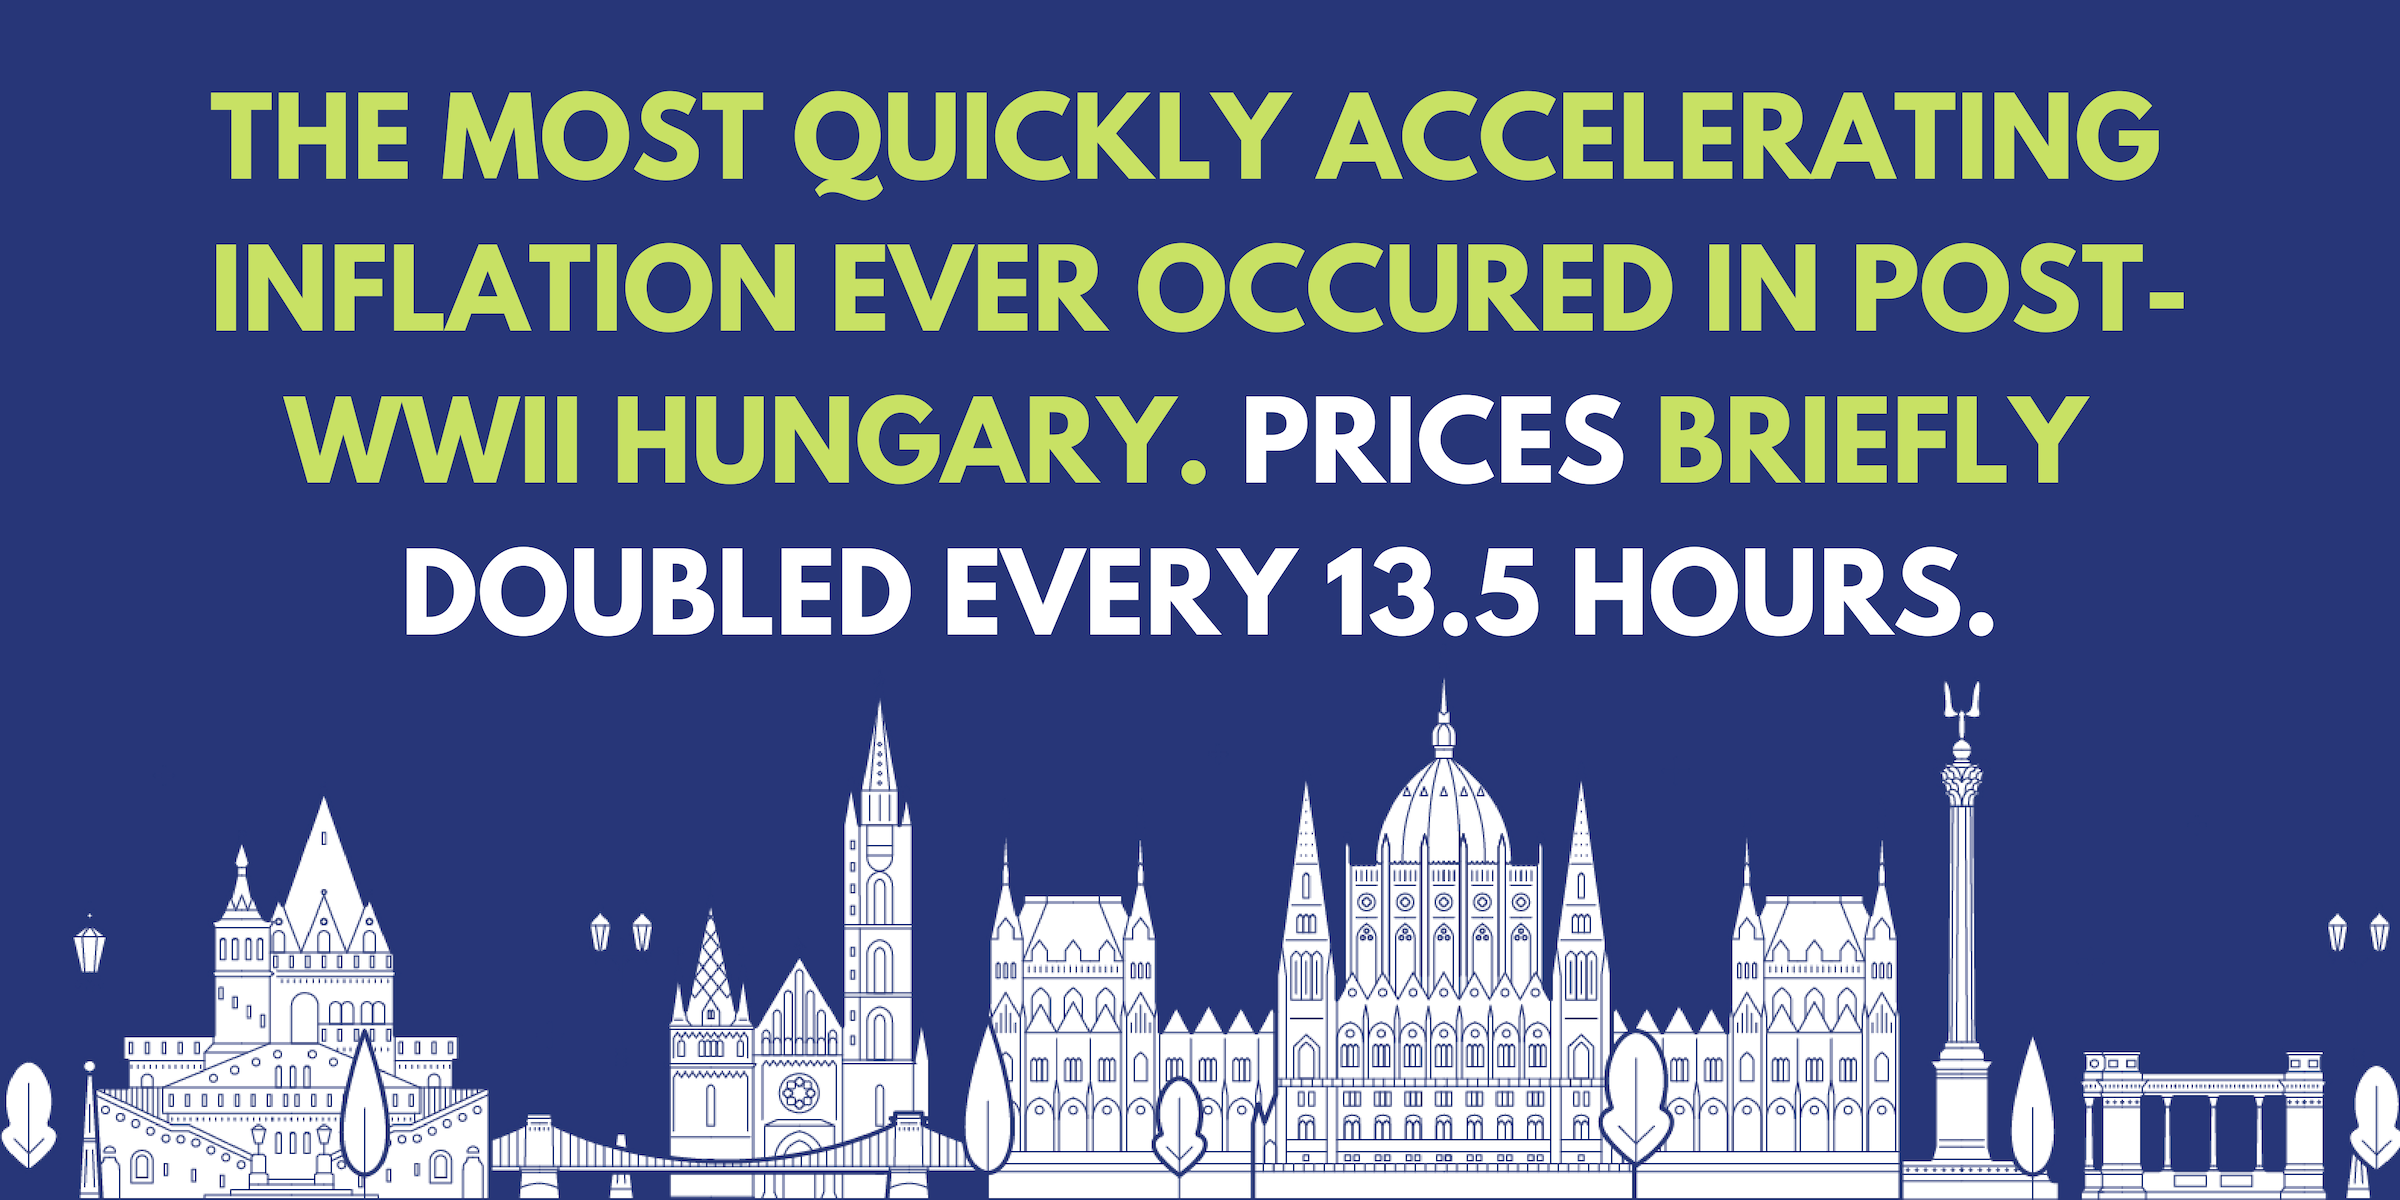 The most quickly accelerating inflation ever occurred in post-WWII Hungary. Prices briefly doubled every 13.5 hours.